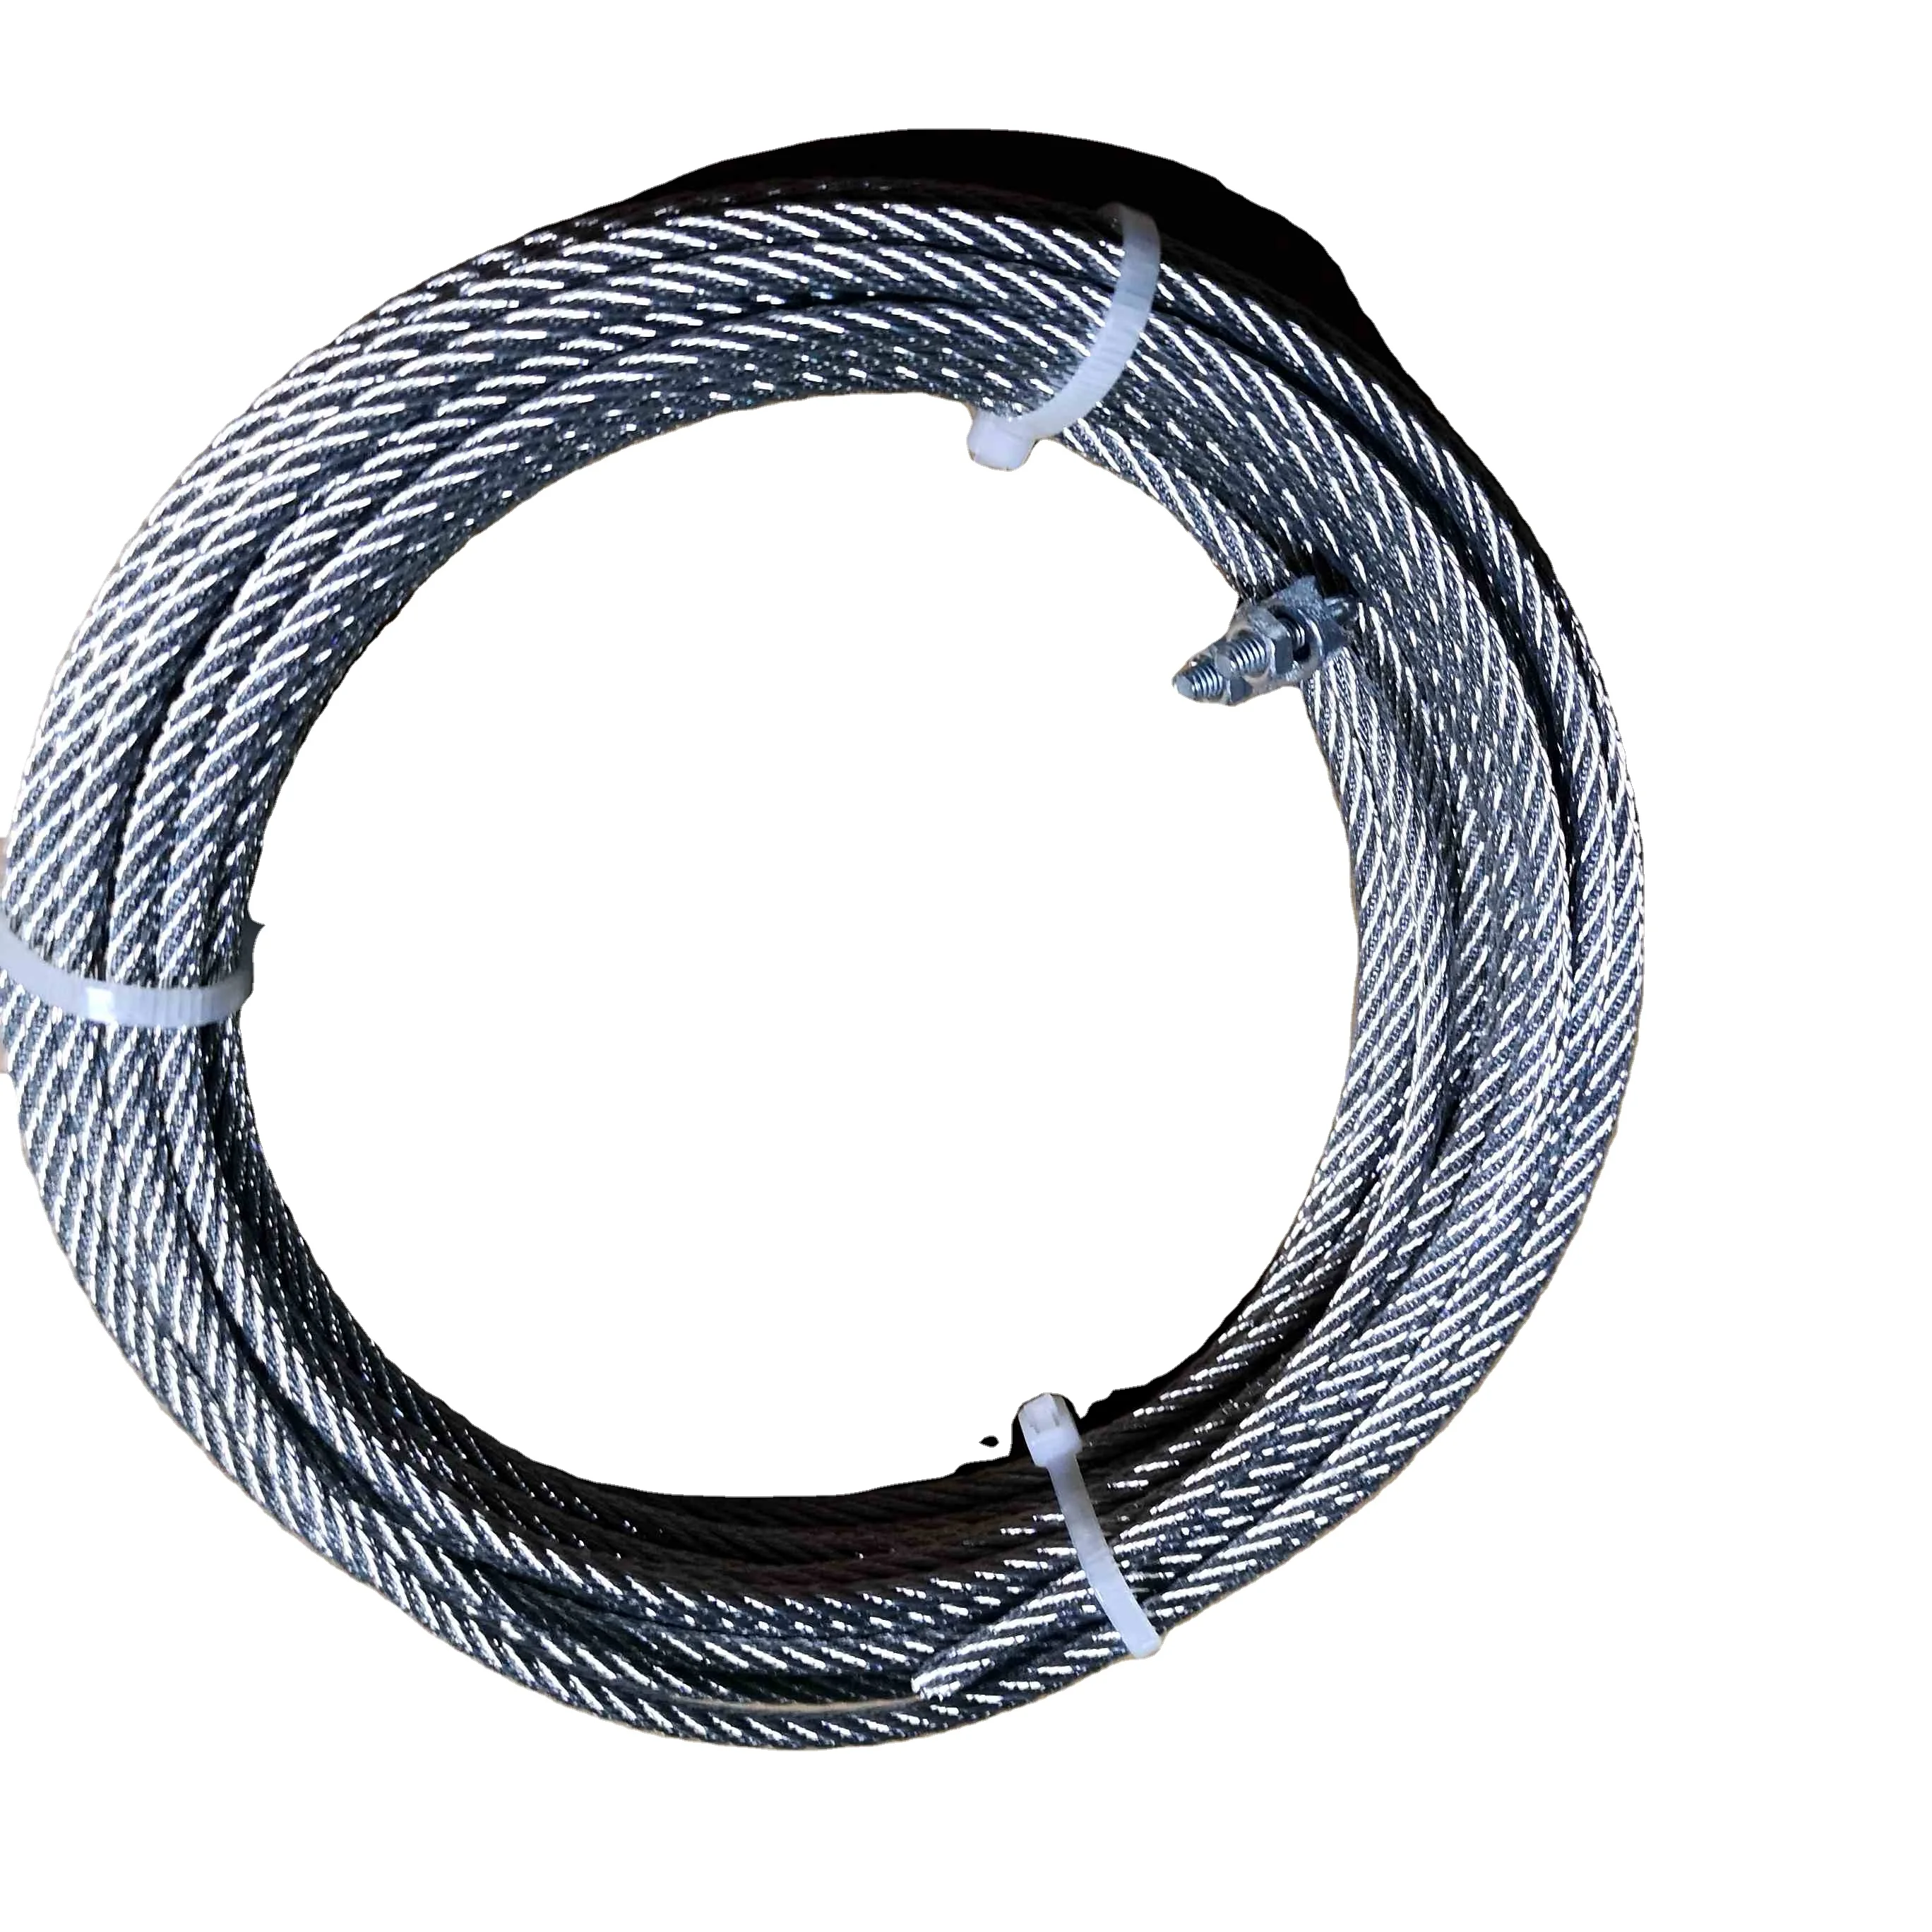 BV API ISO Certificate China Manufacture Steel Wire Rope for